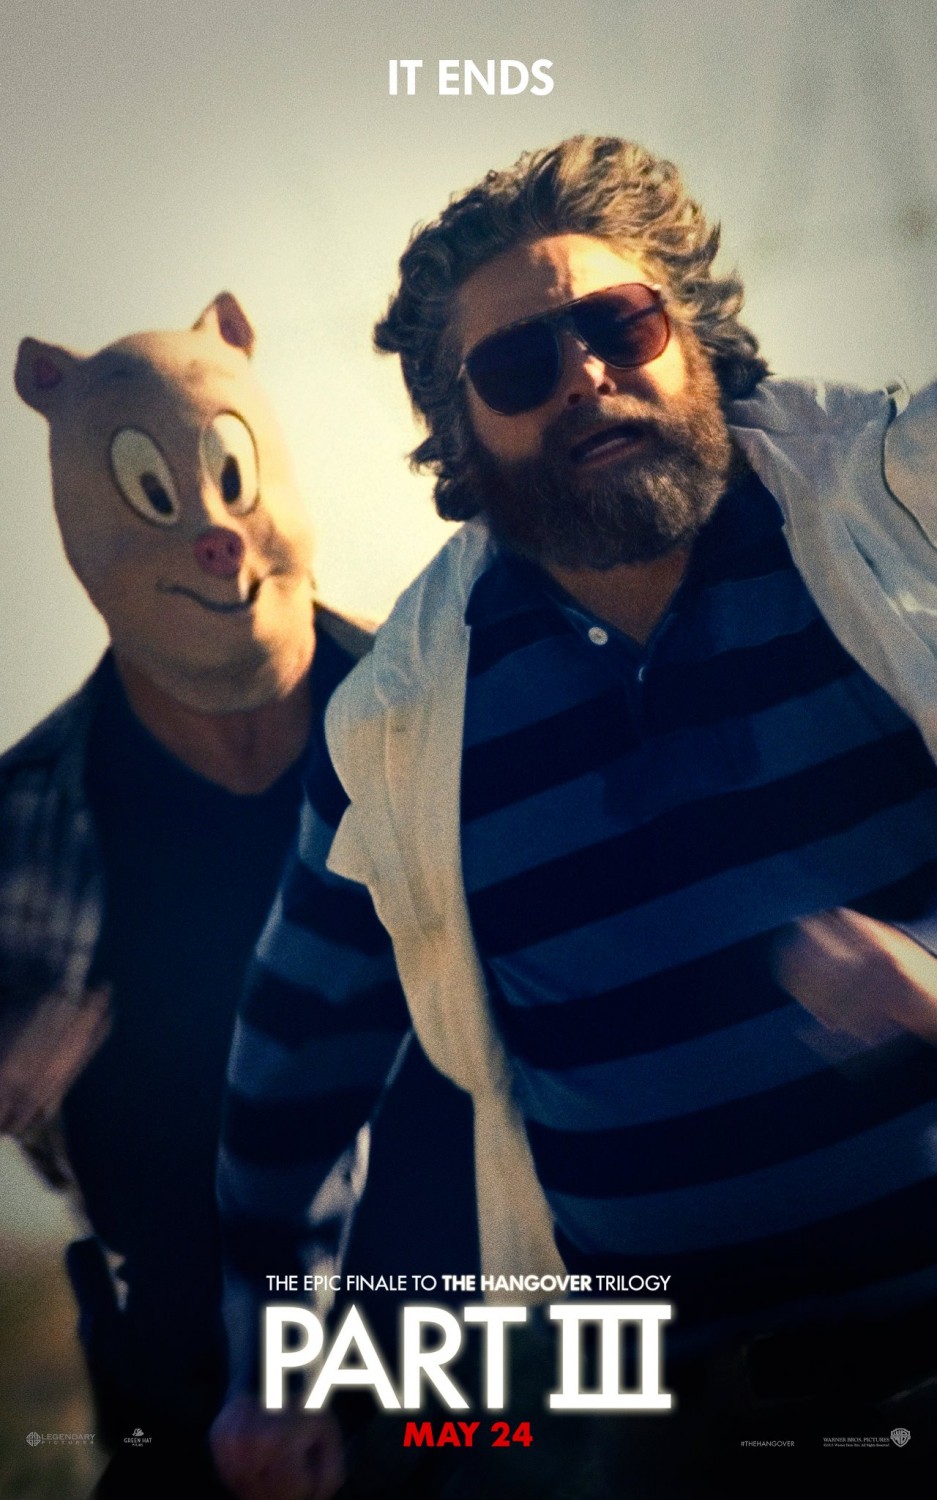 The Blot Says The Hangover Part Iii “the End” Character Movie Posters